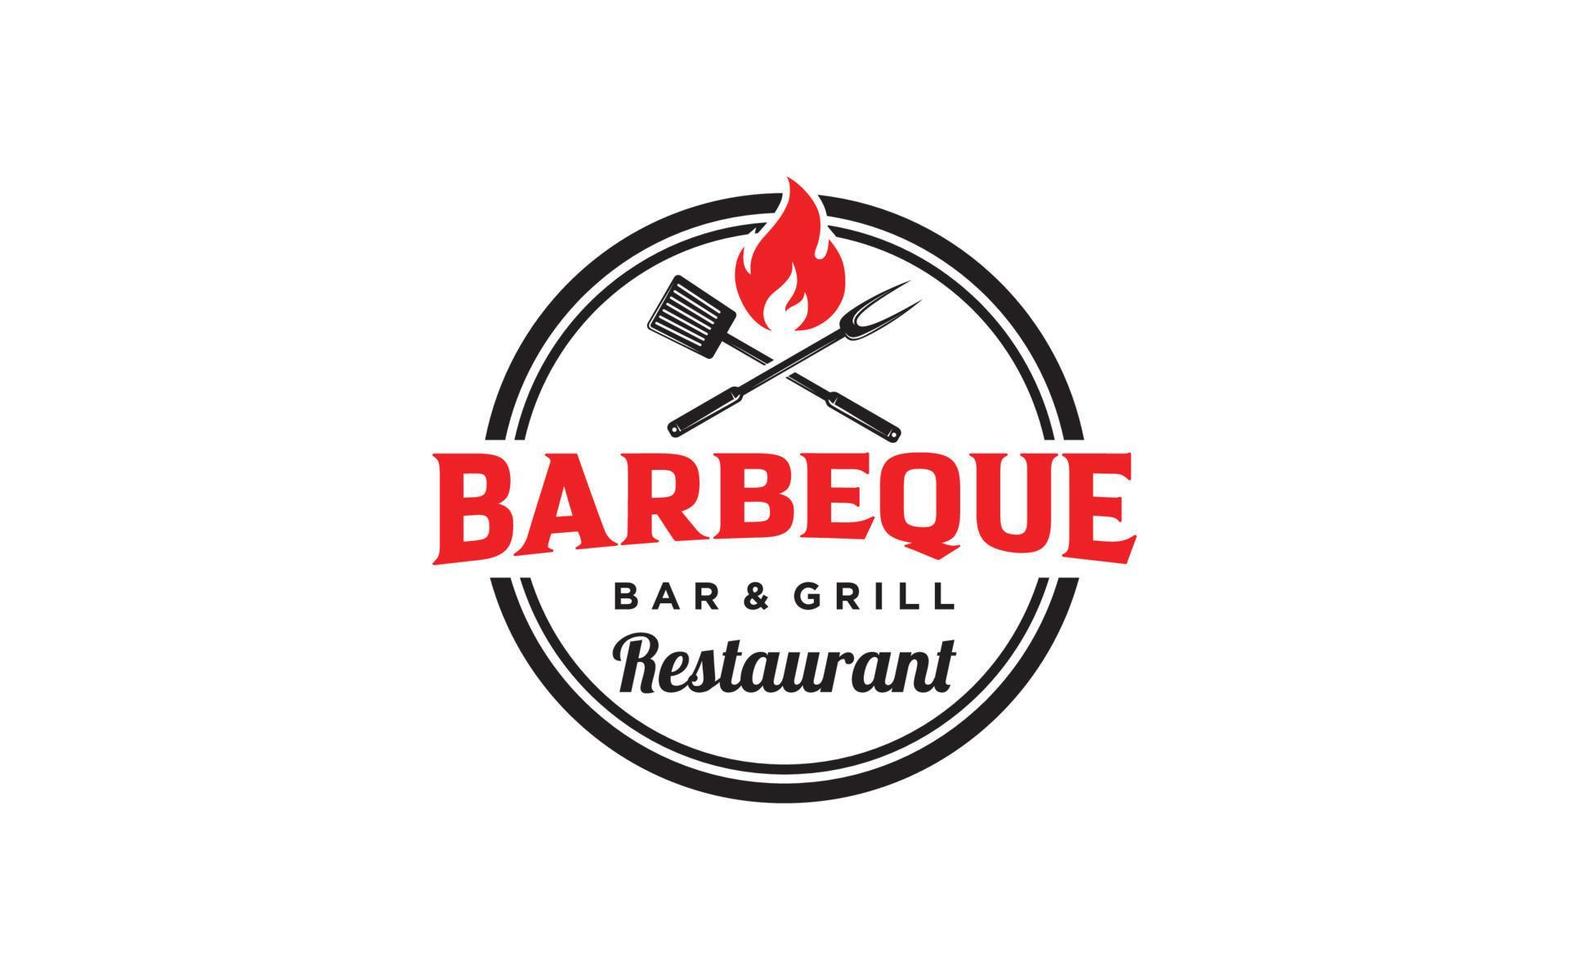 Fire Flame Vintage Retro BBQ Grill, Barbecue, Barbeque Label Stamp Logo design template vector